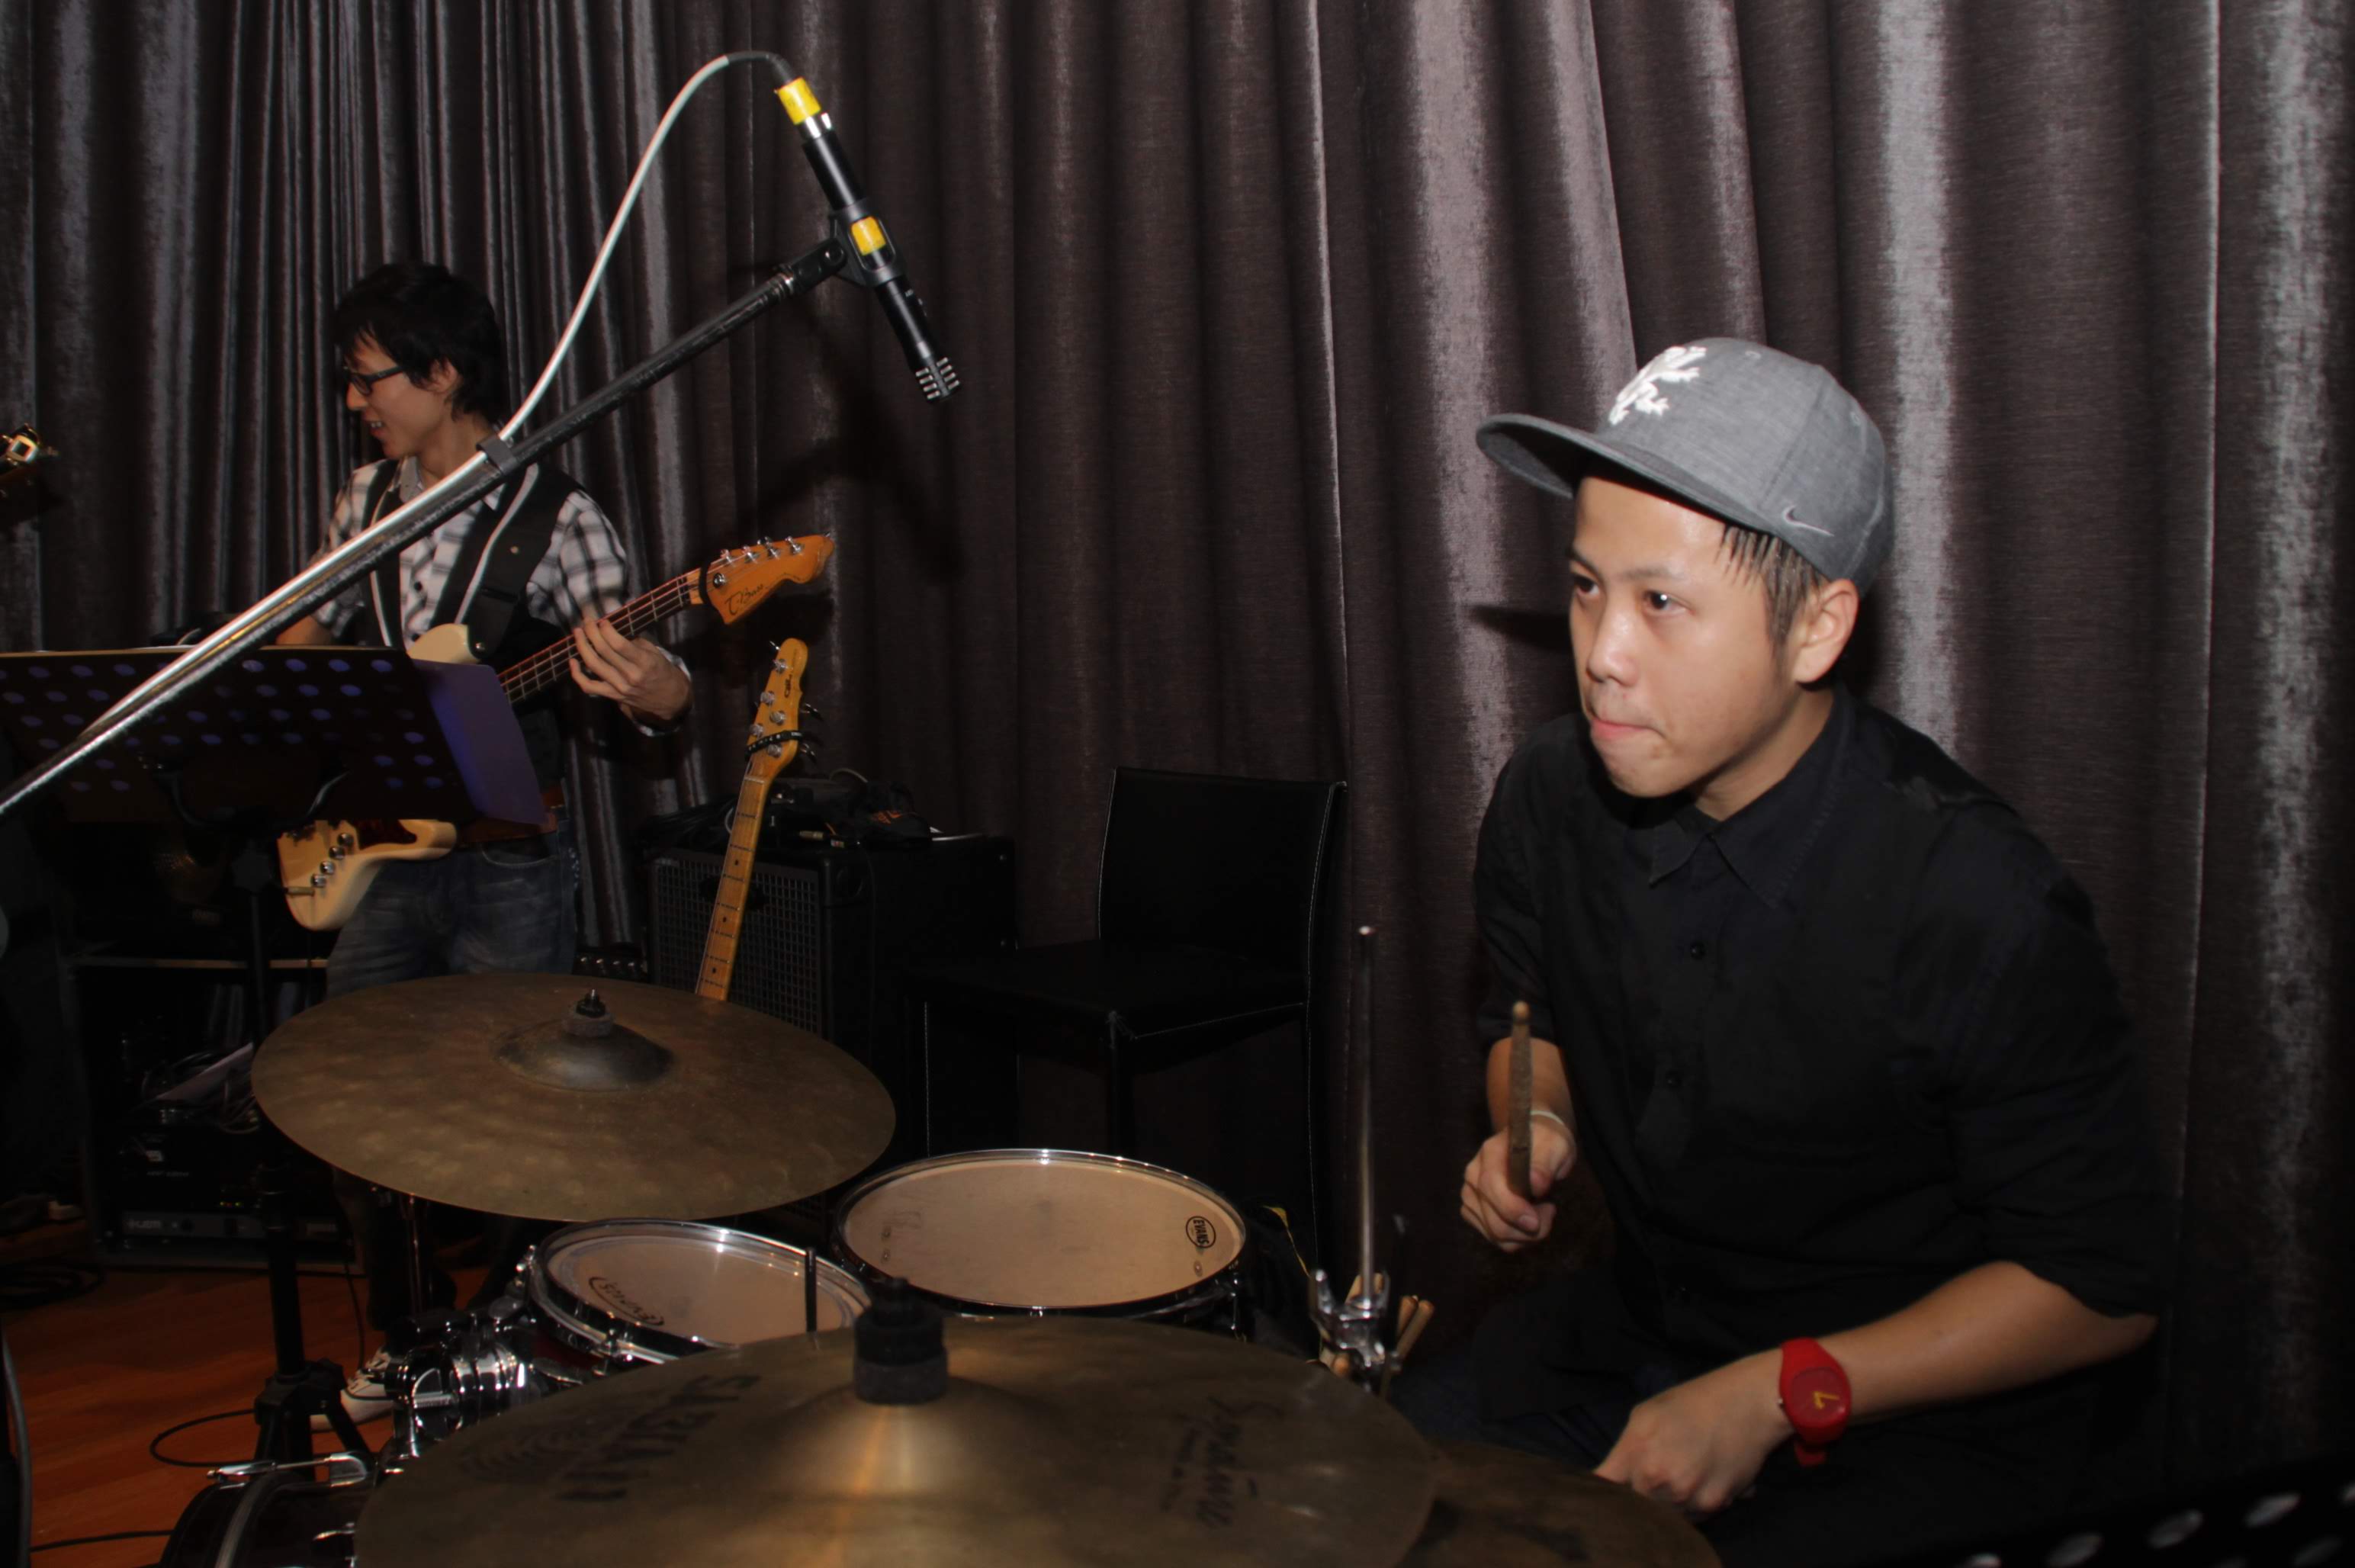 Drum Classes for Kids & Adults in Jalan Klang Lama KL by Woodpecker Music Lessons